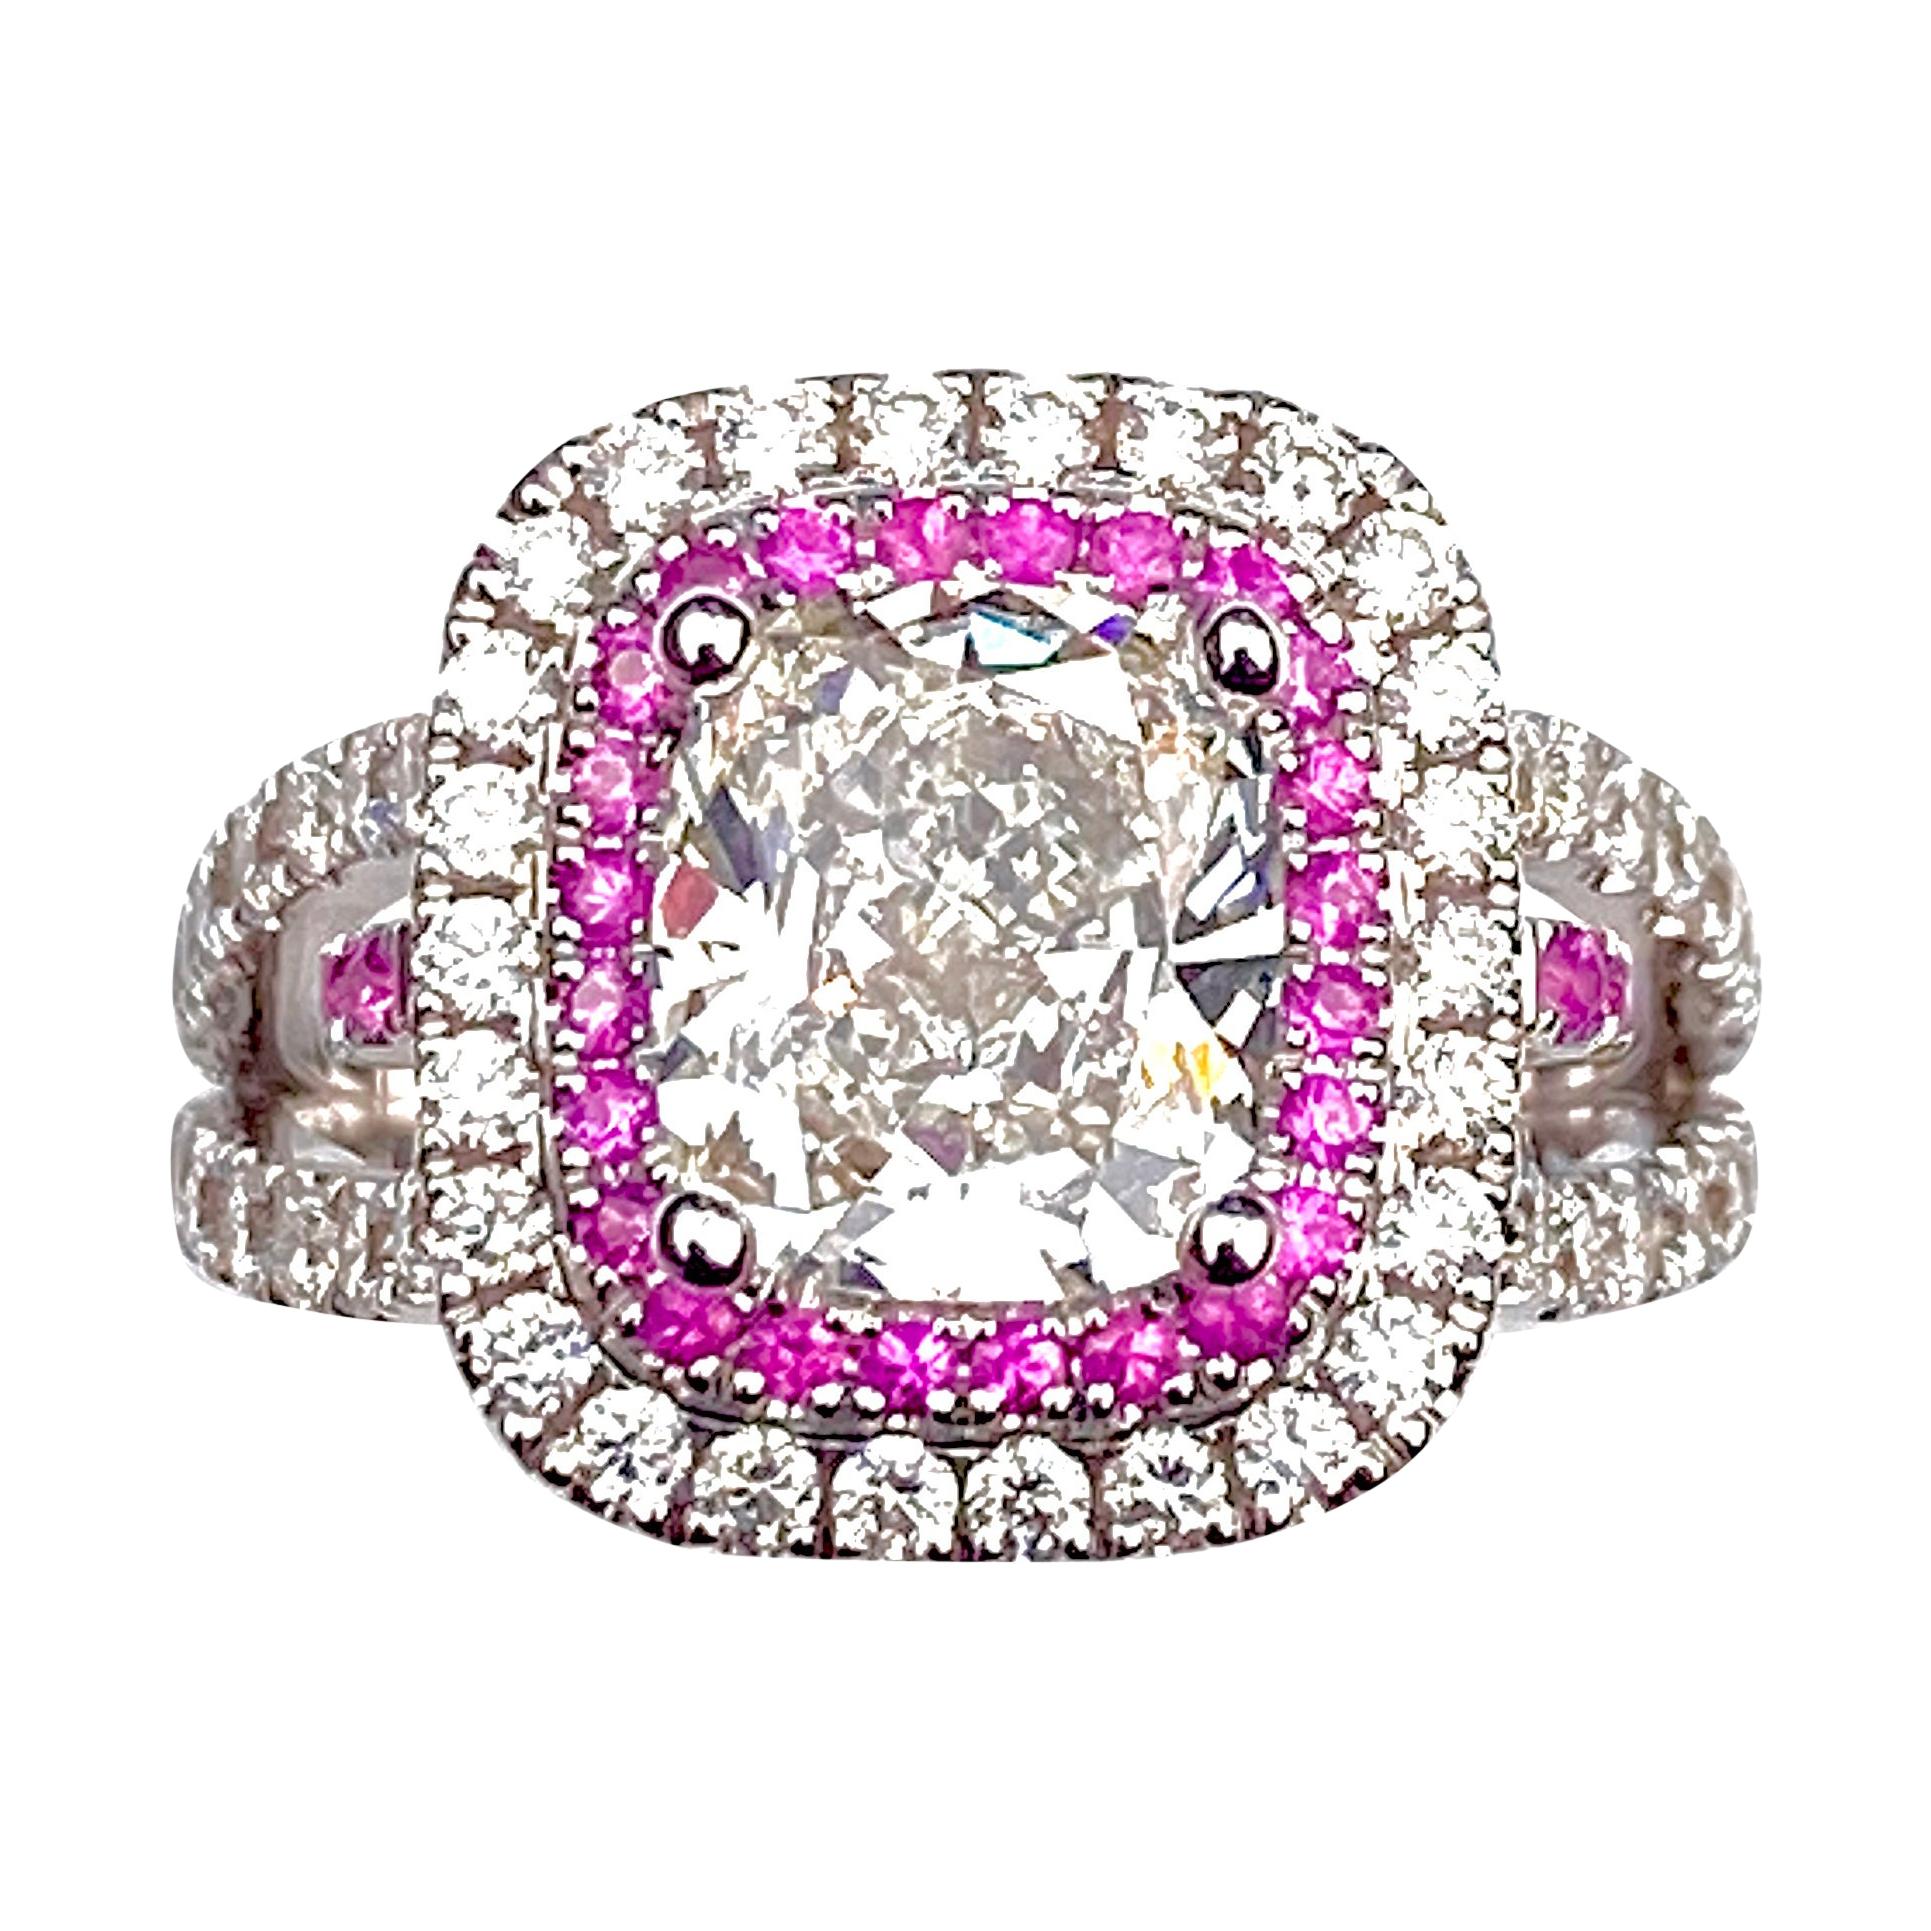 Rectangular Cushion Diamond Engagement Ring with Diamond and Pink Sapphire Halo For Sale